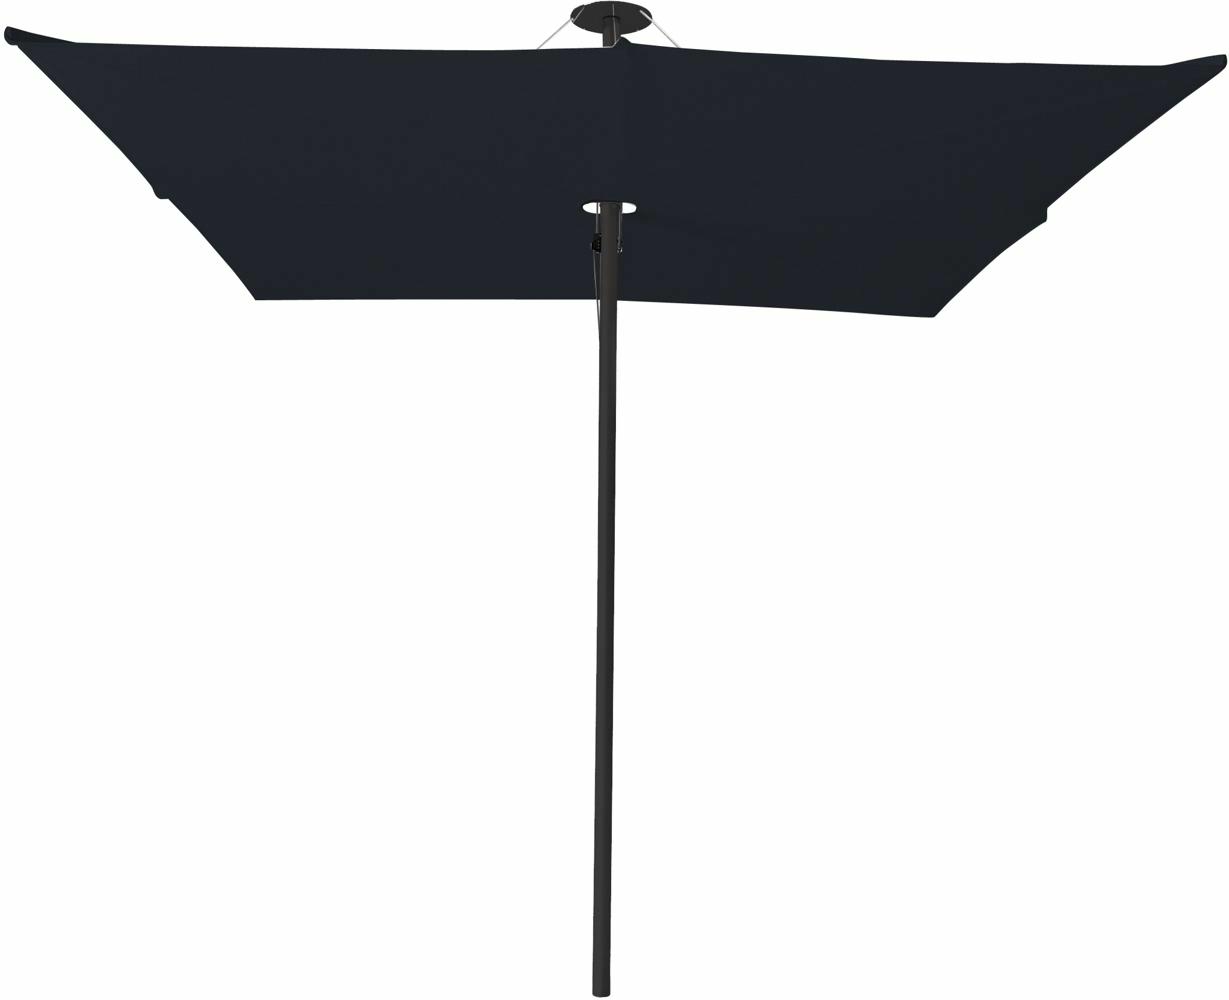 Infina center post umbrella, 2,5 m square, with frame in Dusk and Solidum Black canopy. 